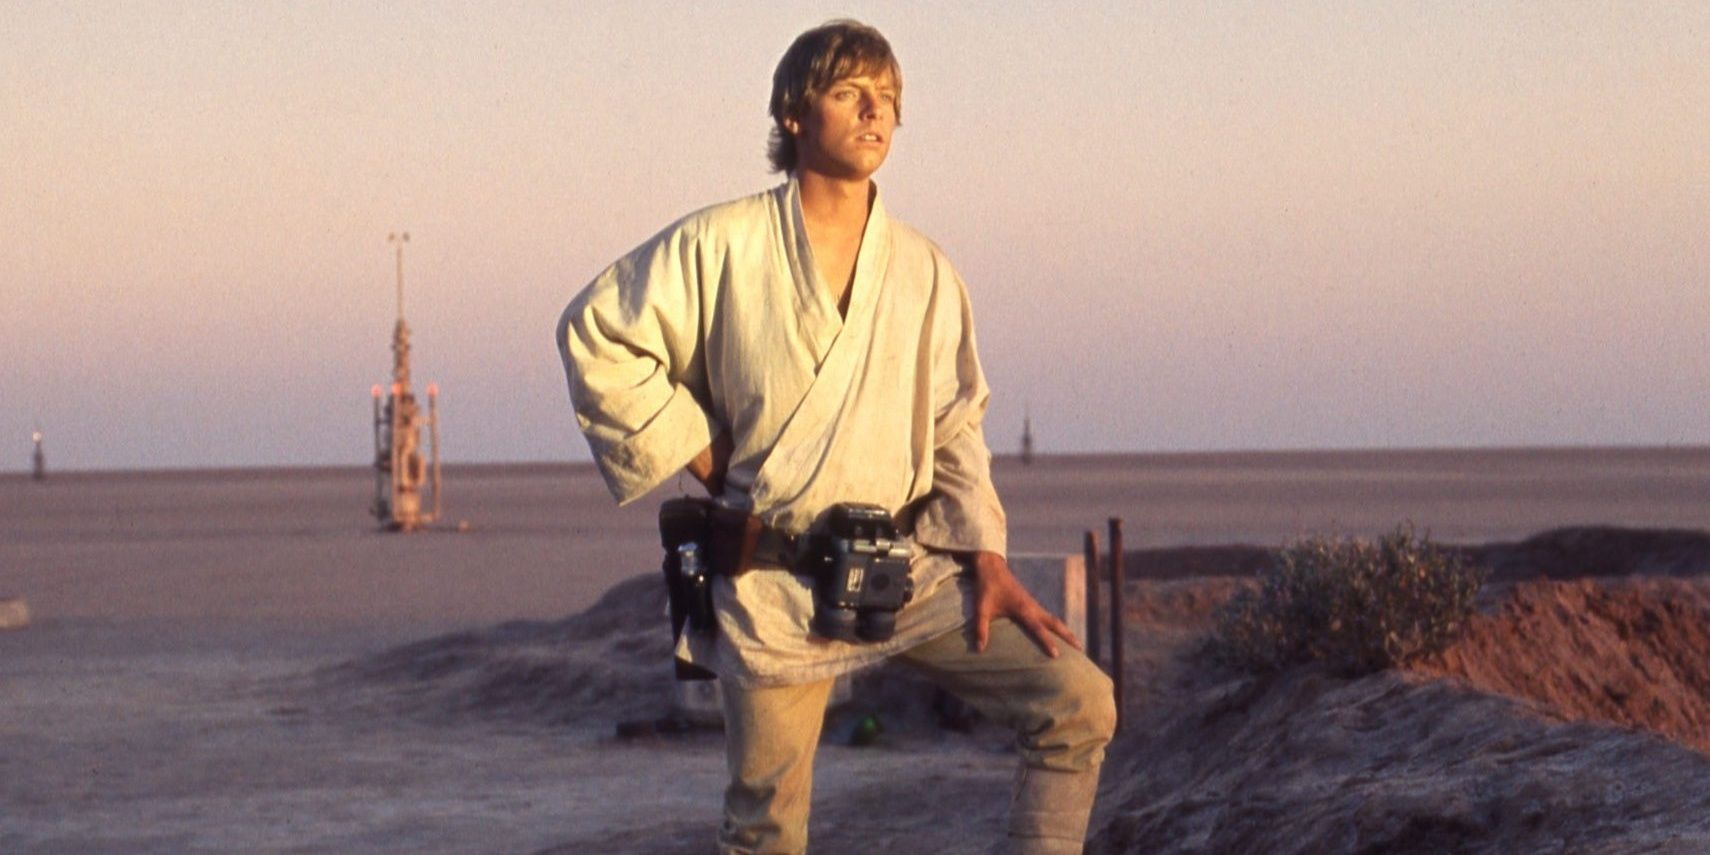 Luke Skywalker staring at the two suns on Tatooine